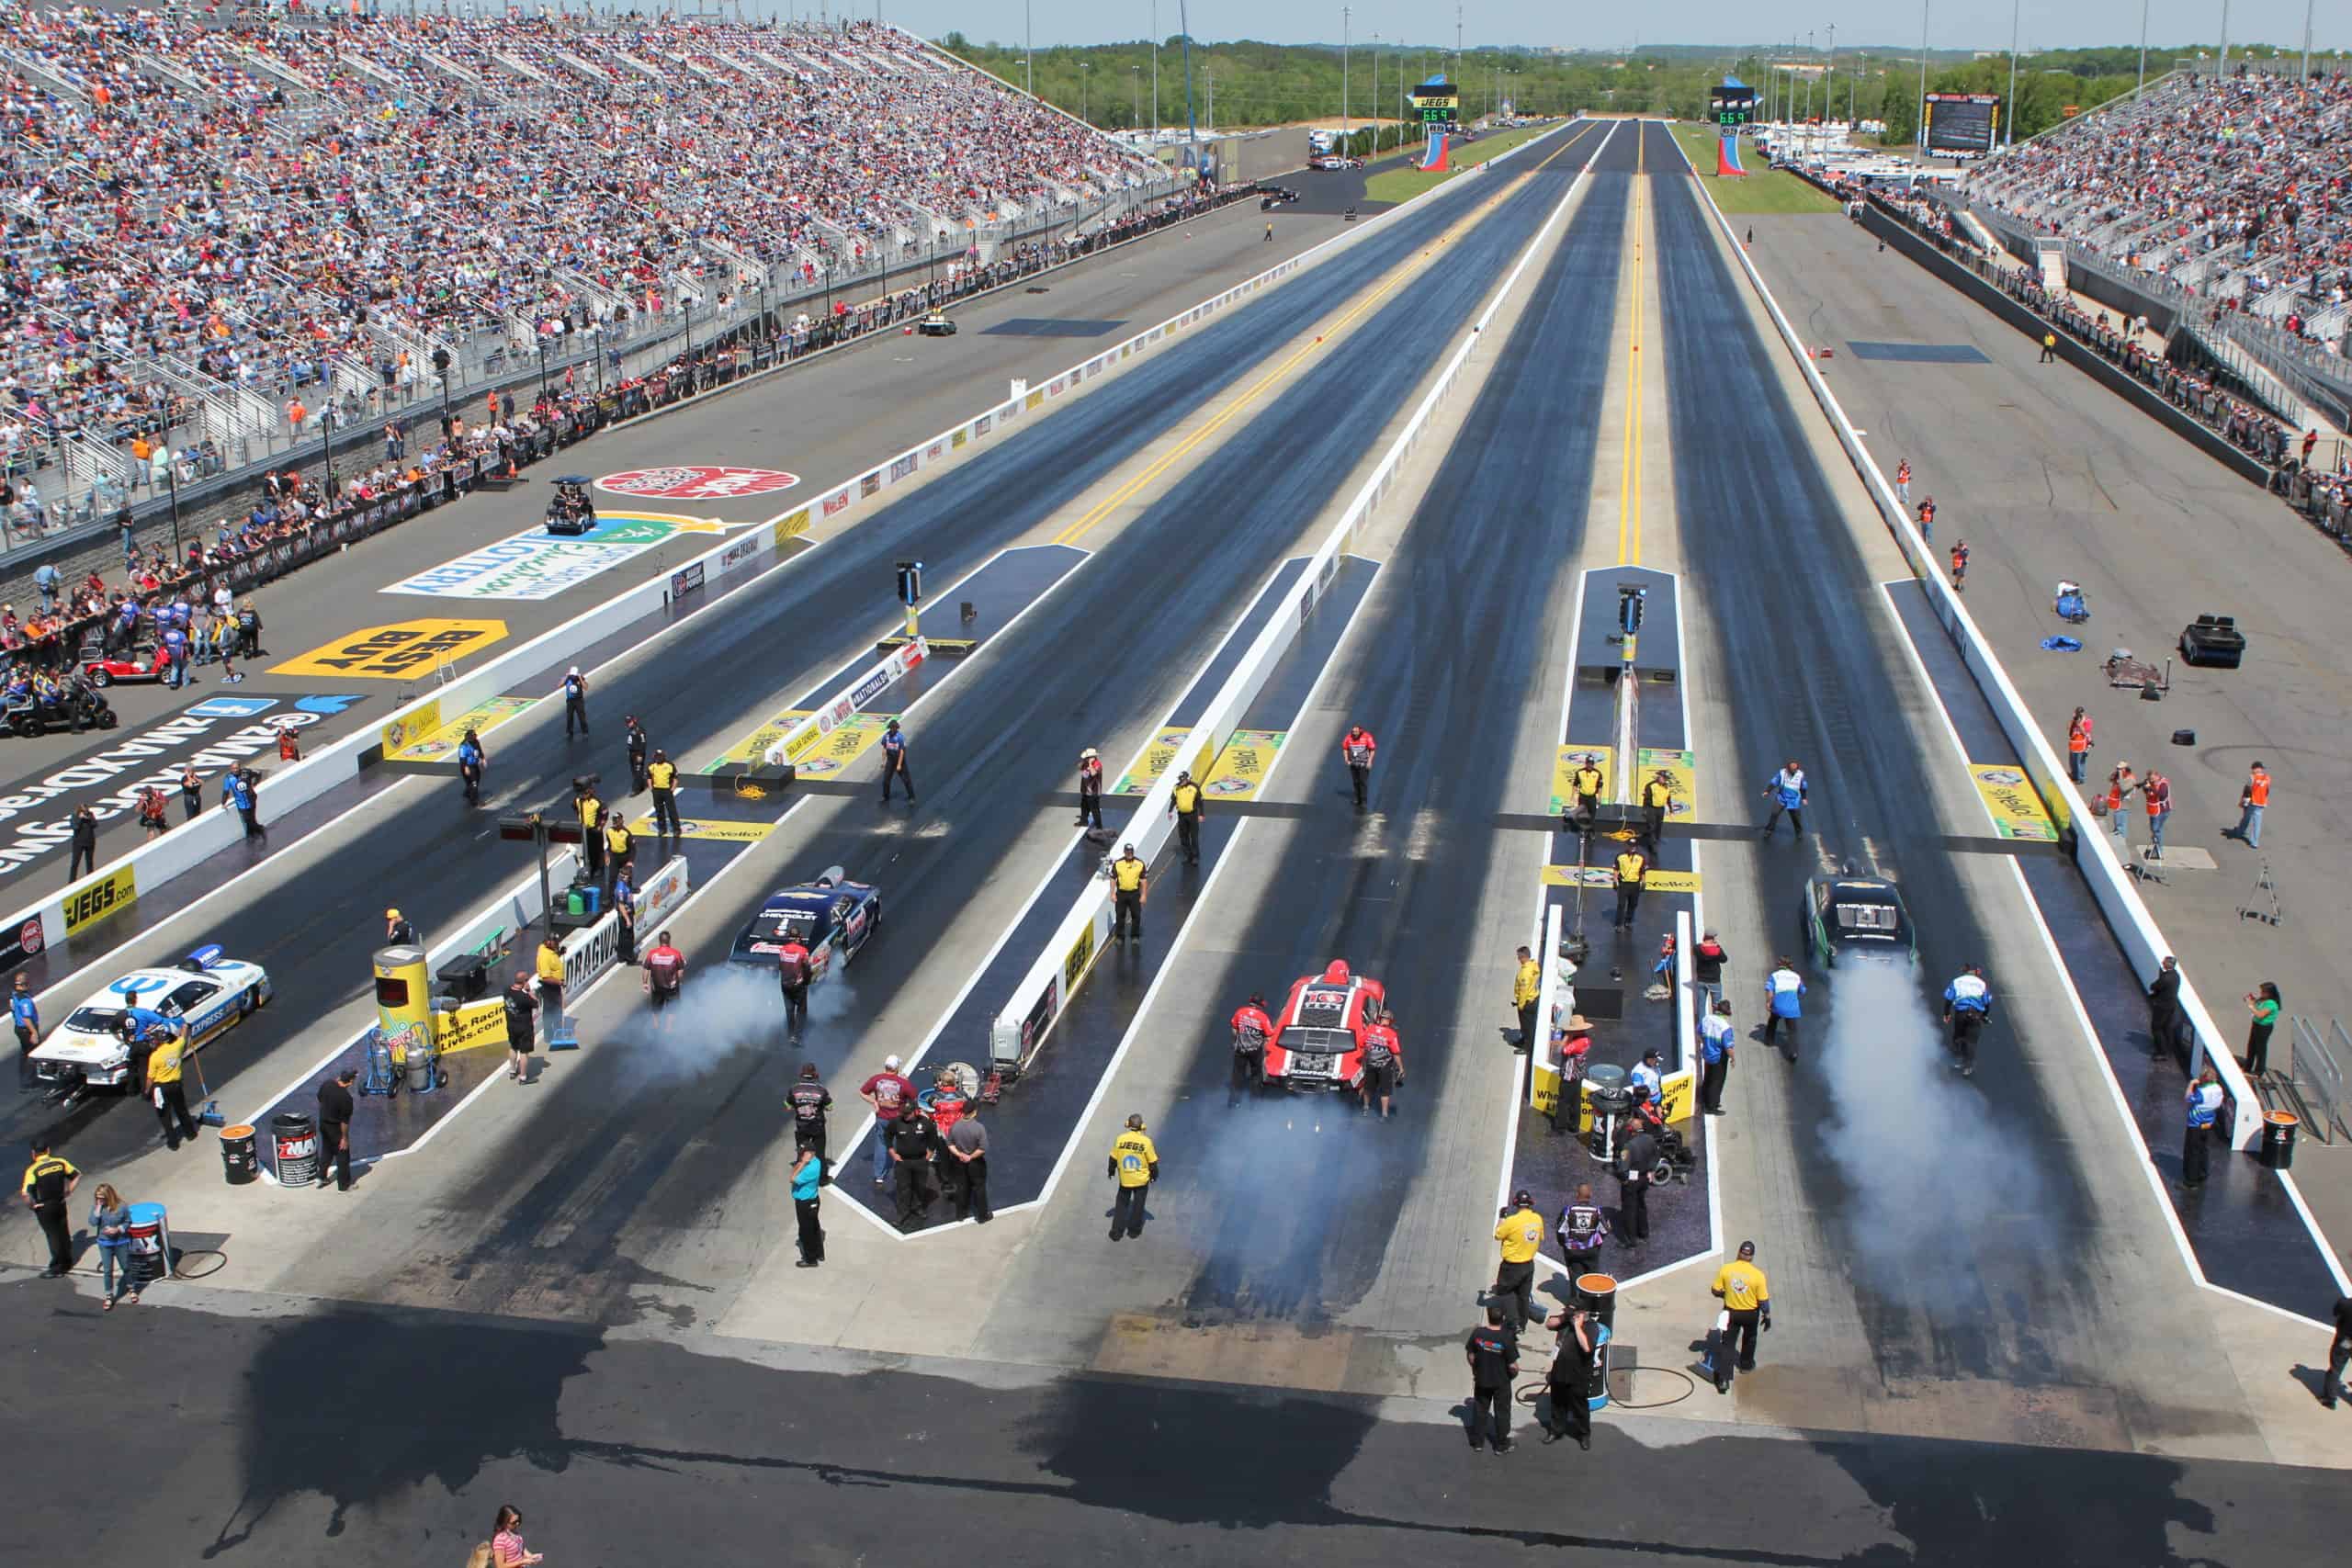 Dragsters race on the four-lane drag strip in Concord, North Carolina